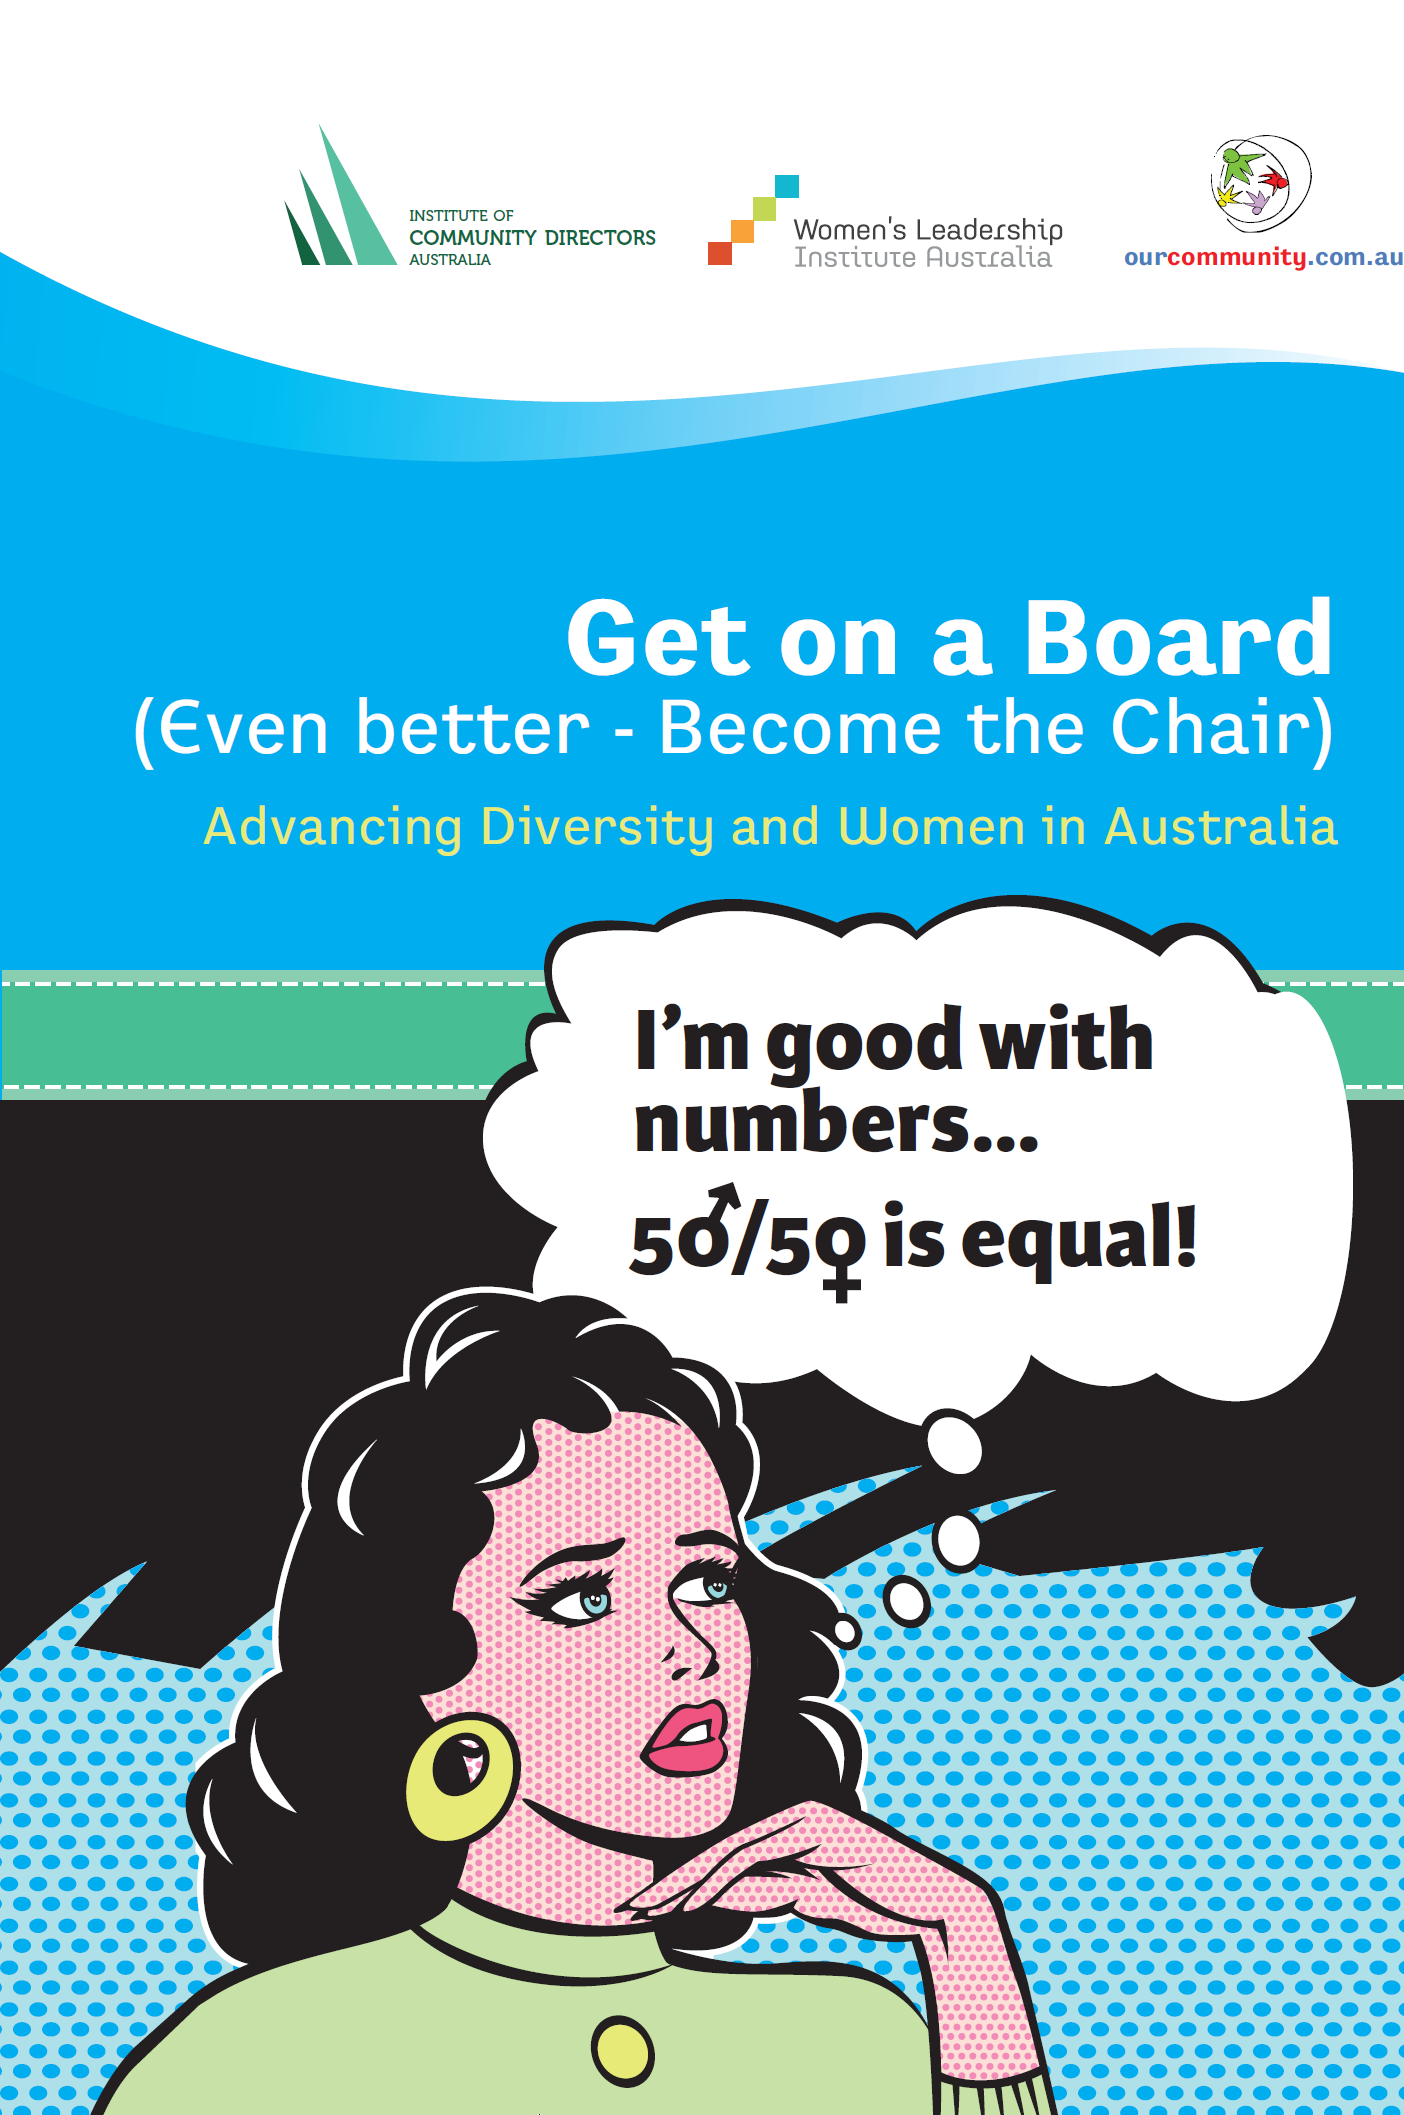 Get on a Board (Even better - Become the Chair) - Advancing Diversity & Women in Australia